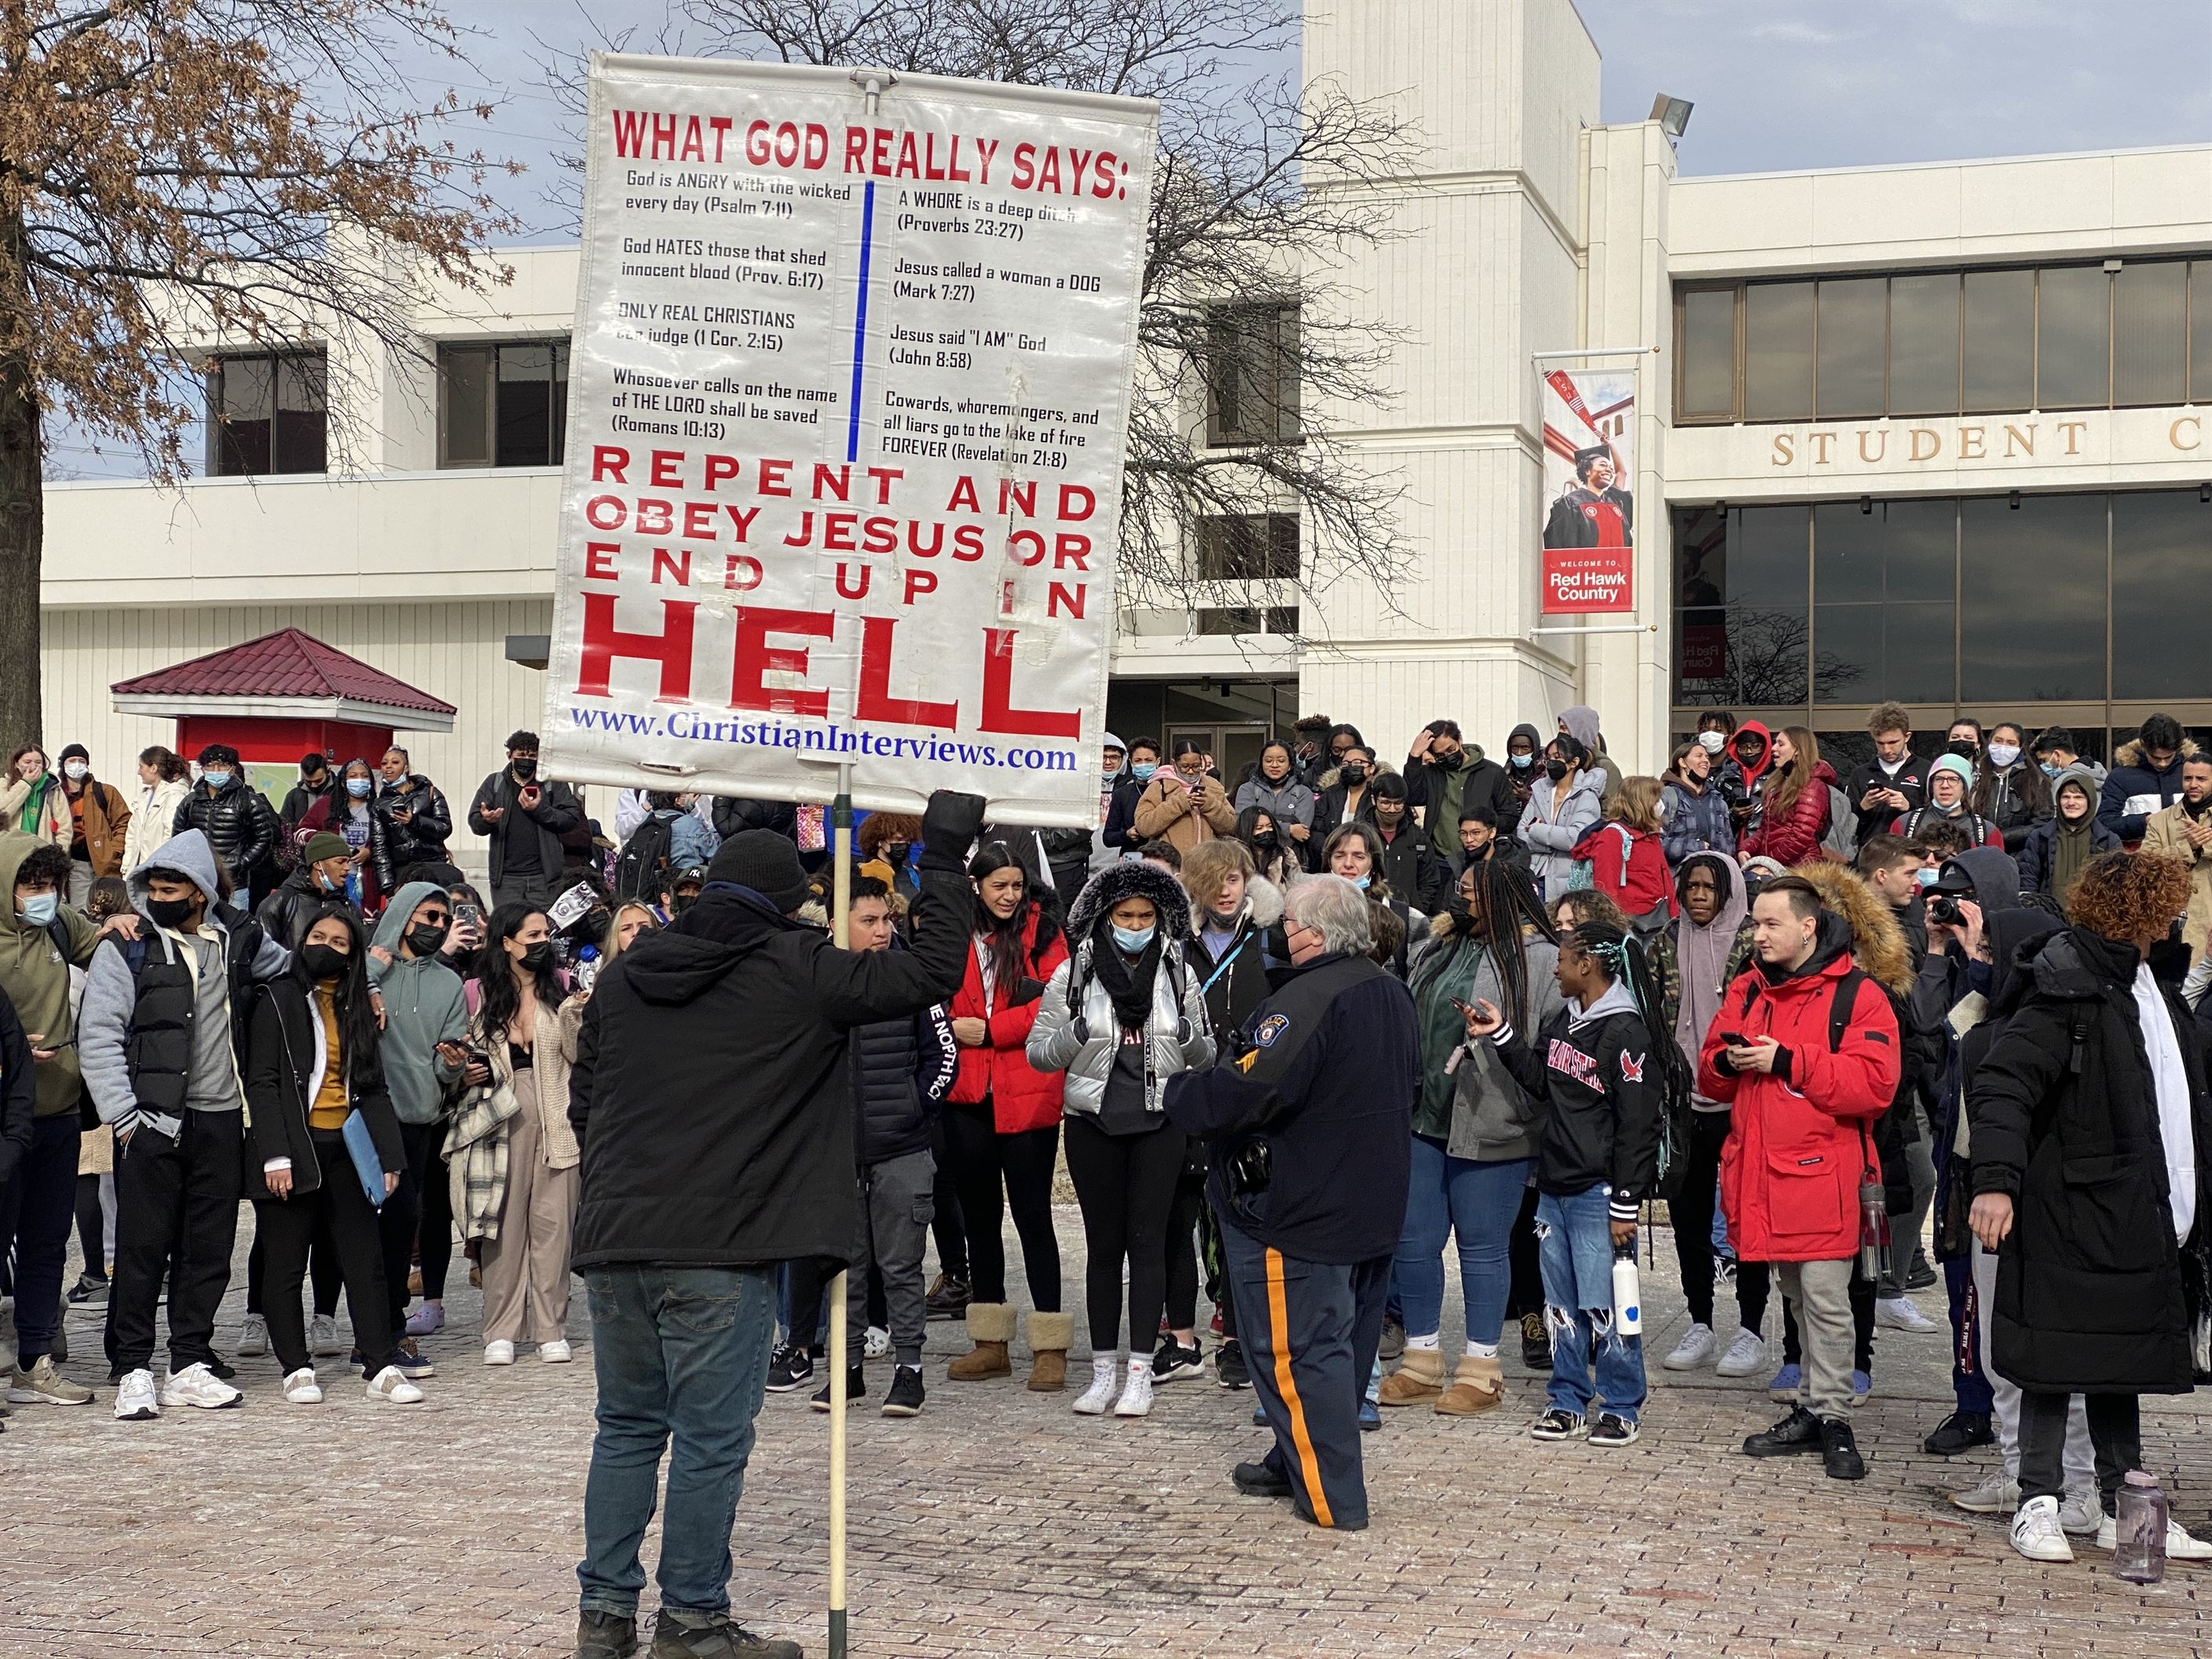 A crowd of students gathered outside the Student Center watching the protest. Michael Callejas | The Montclarion